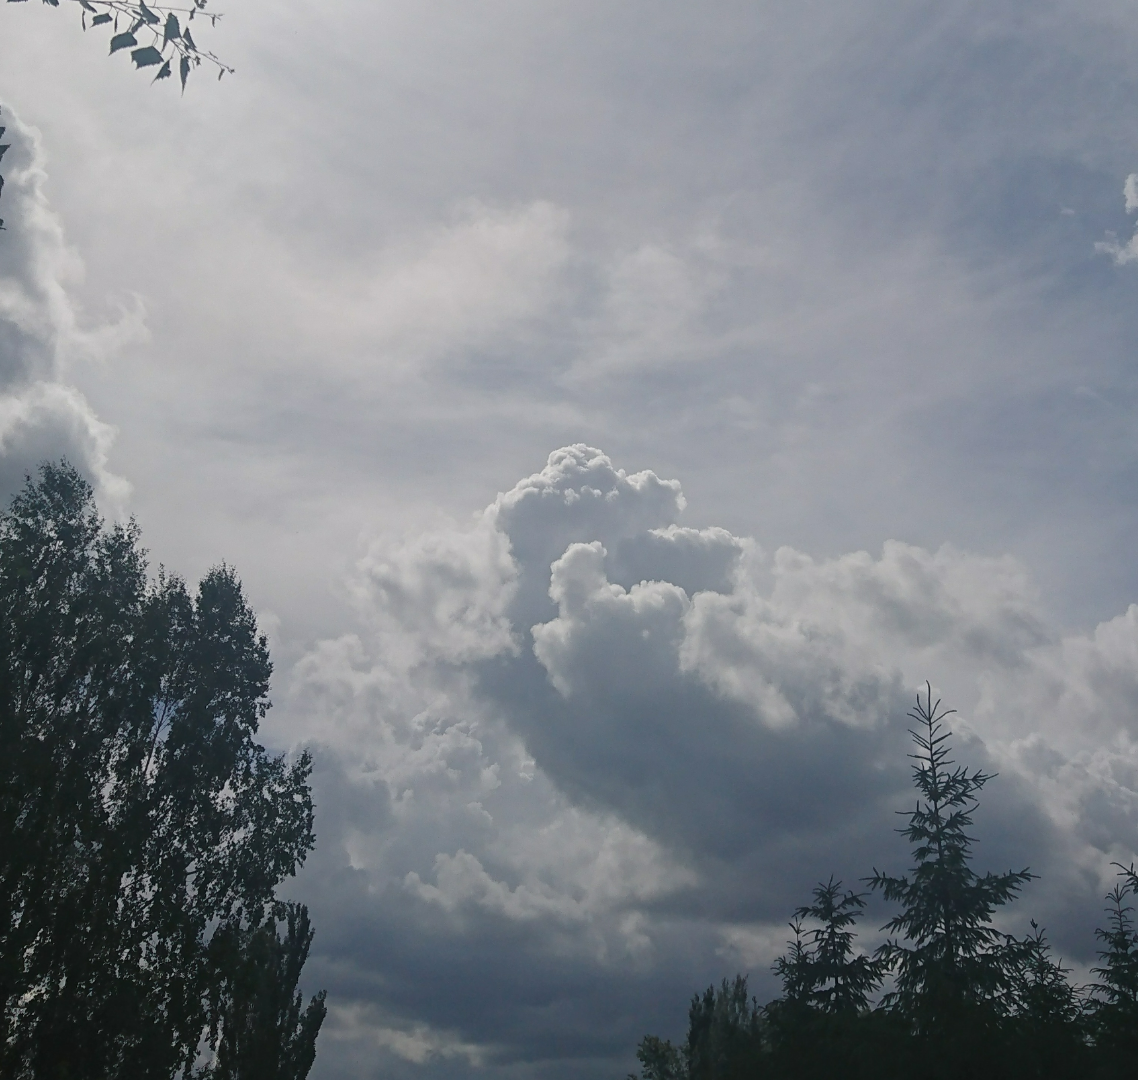 I saw heavenly fak, and you? - My, Sky, good day, Op, Clouds